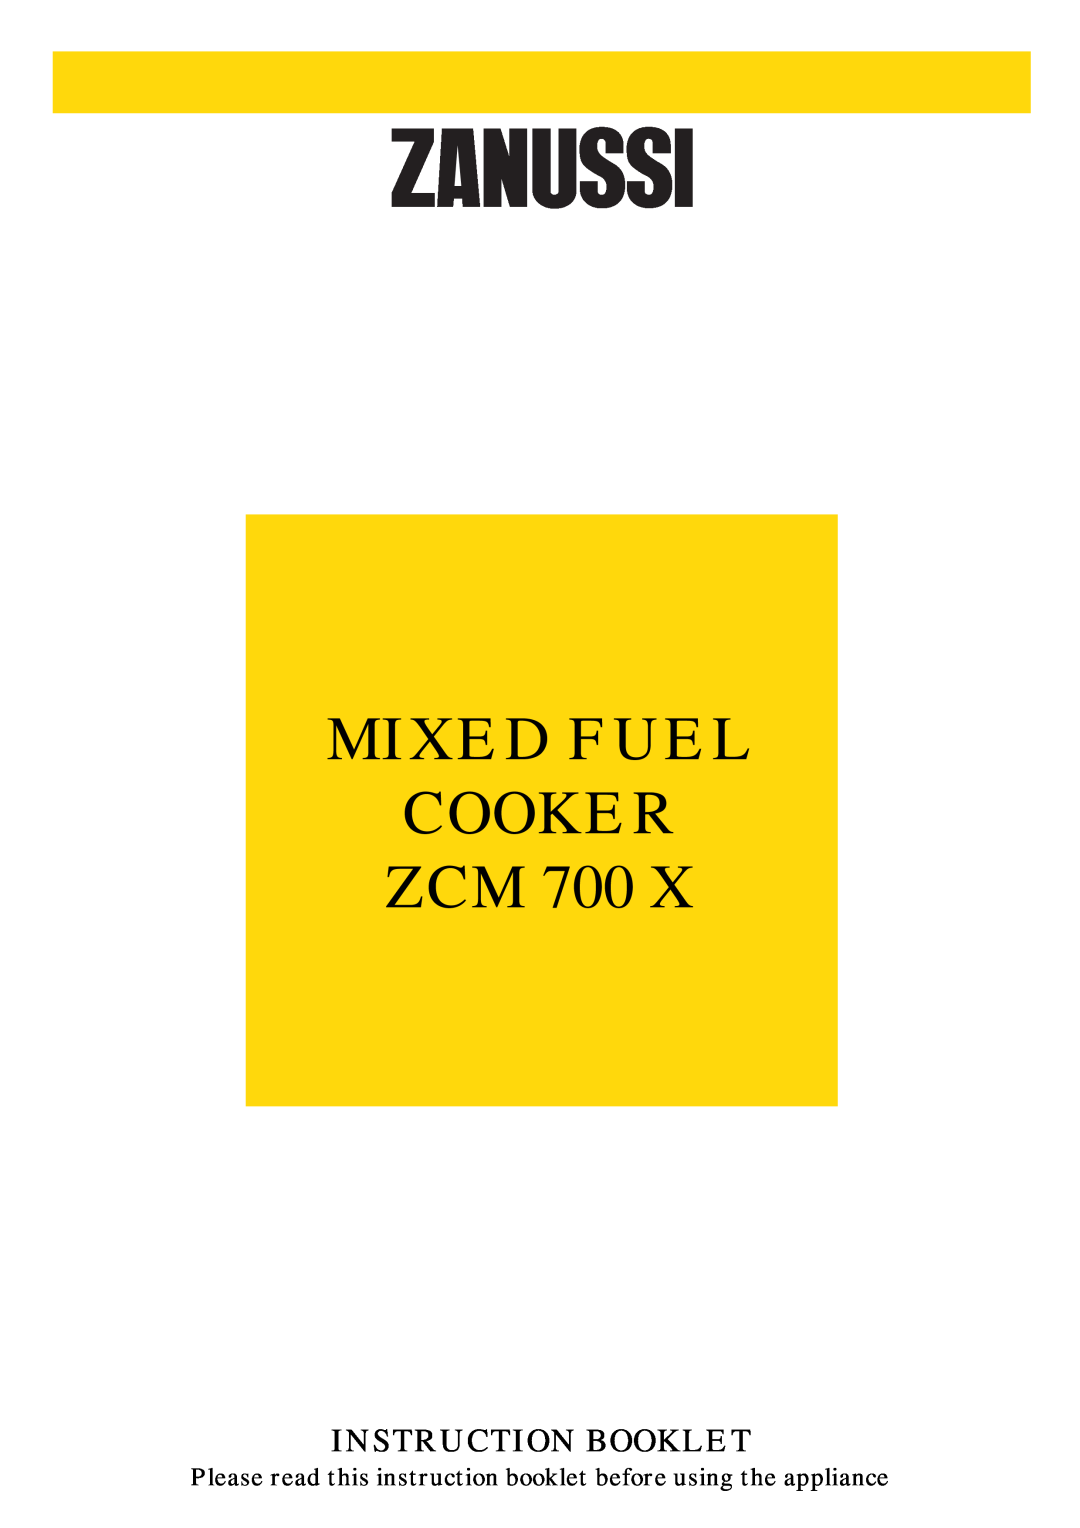 Zanussi ZCM 700 X manual Mixed Fuel Cooker Zcm, Instruction Booklet 